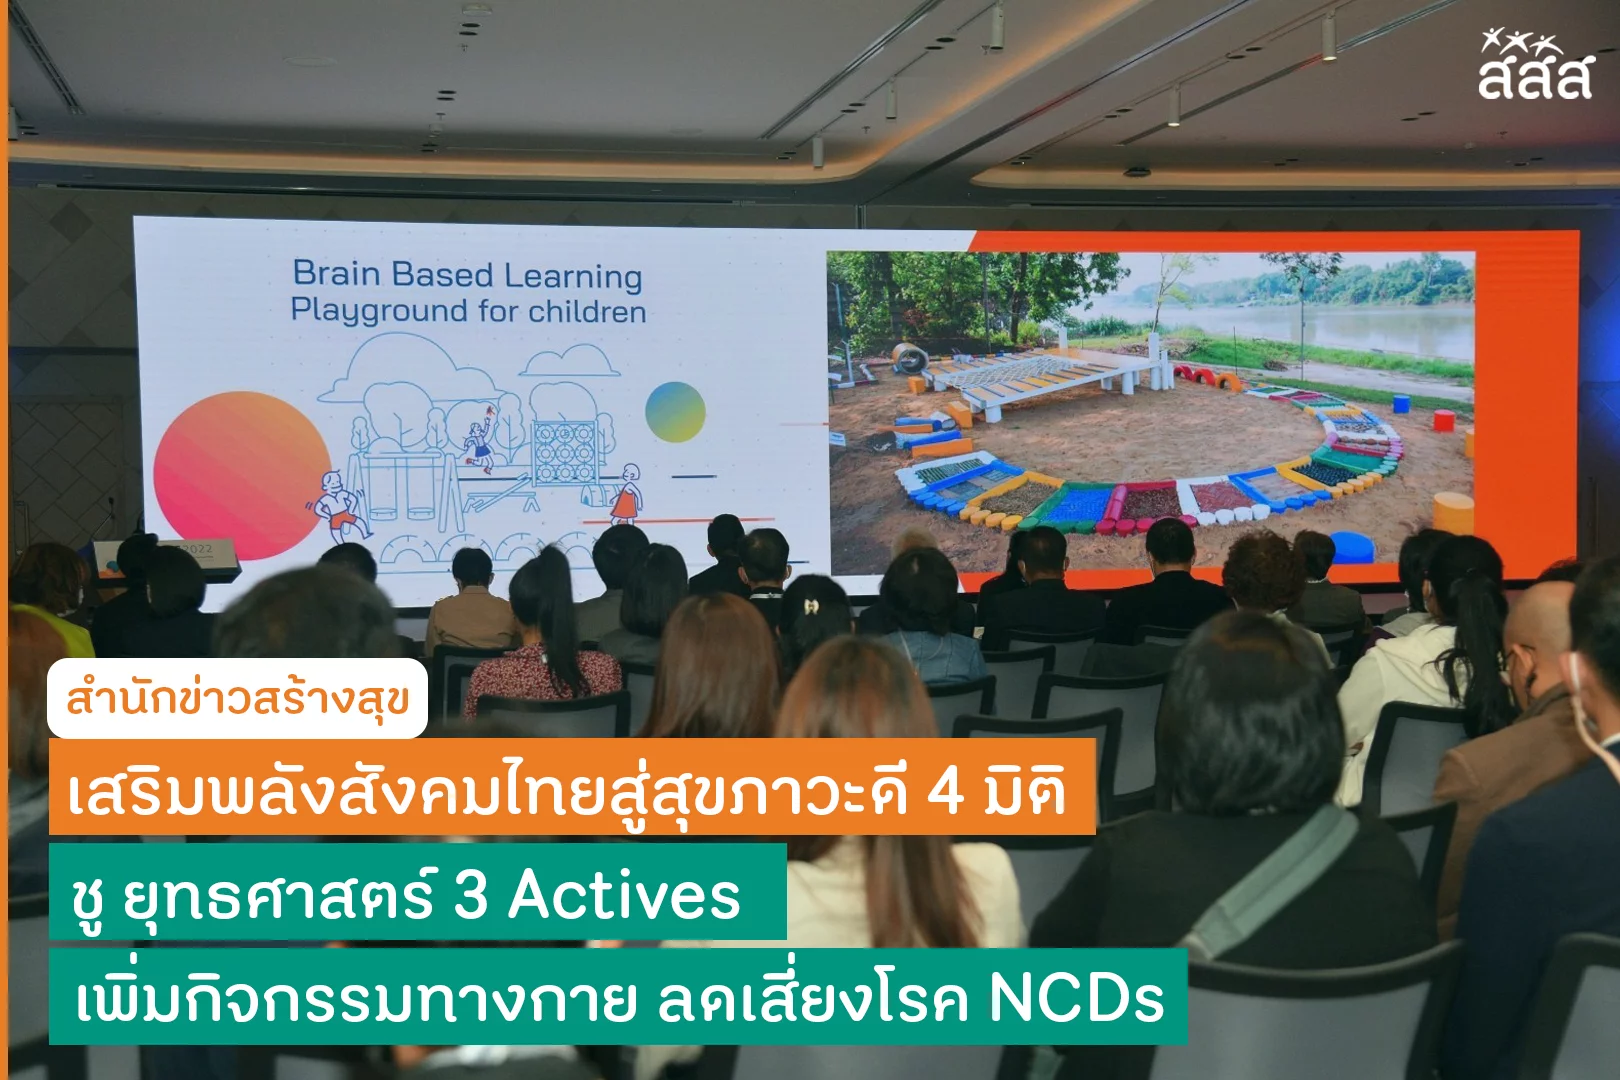 ThaiHealth to promote good health through physical activities with “3 Actives” strategy thaihealth